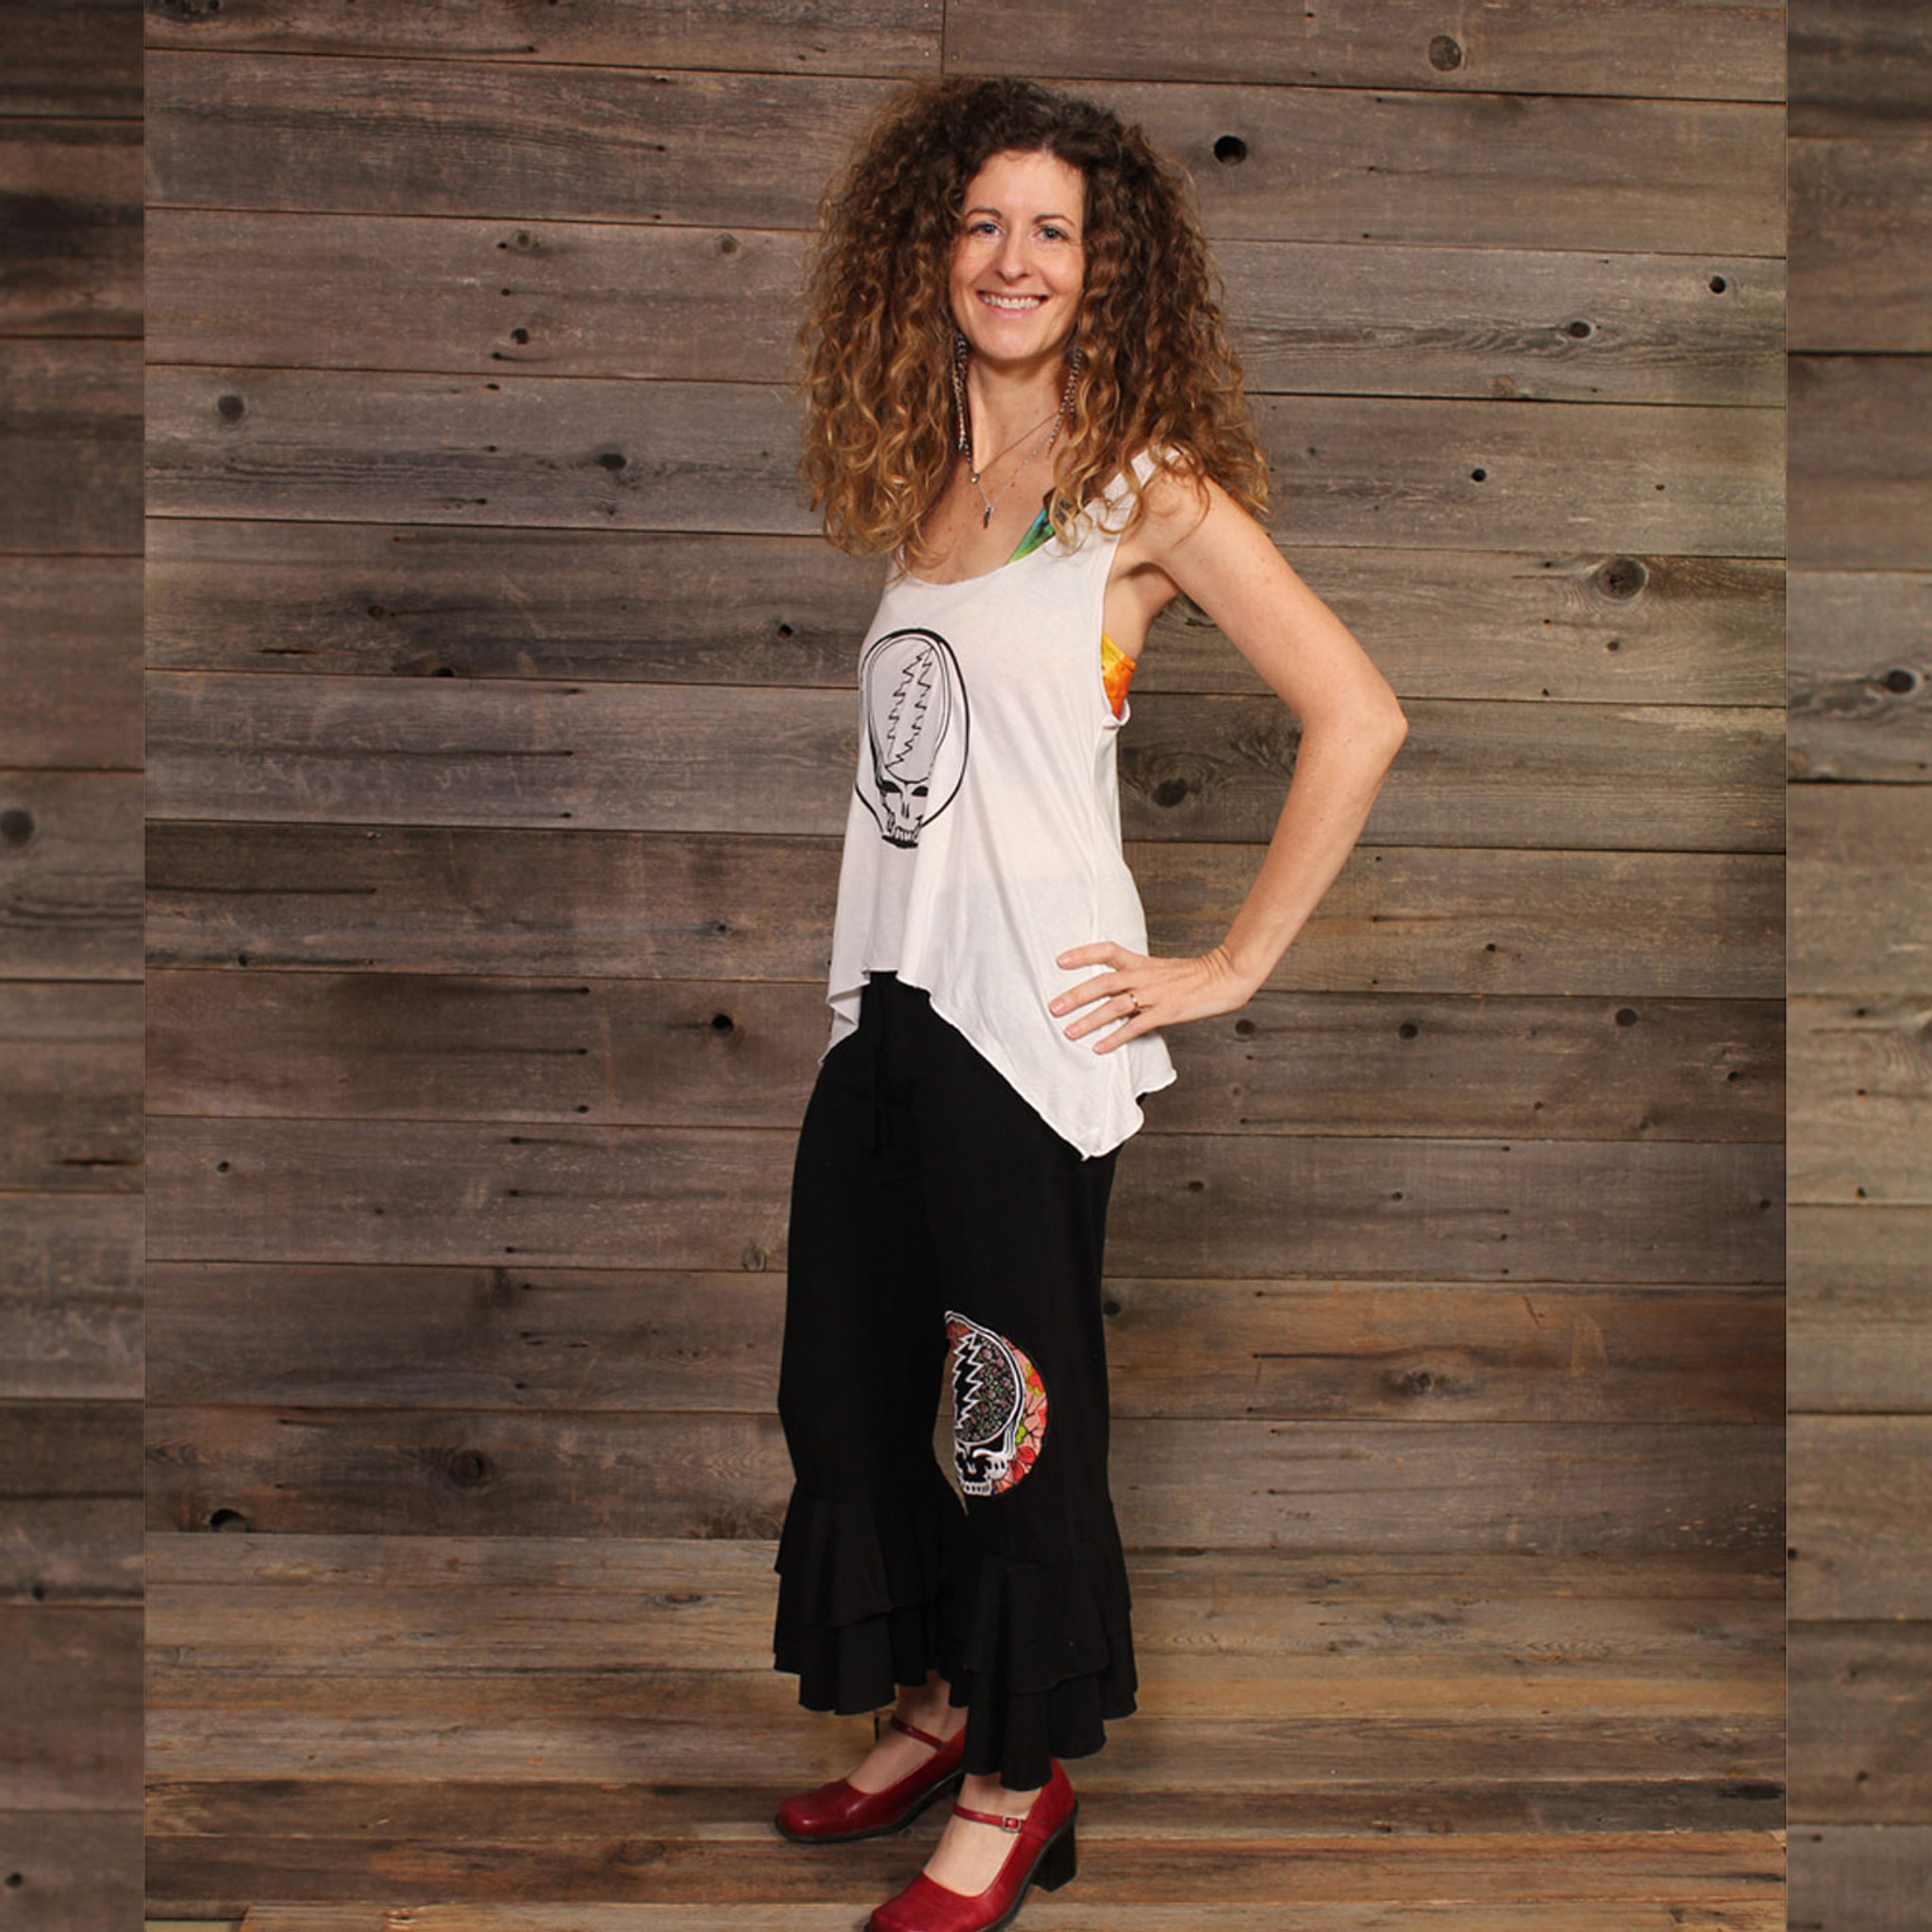 STEAL YOUR FACE CAPRI’S Cotton Ruffle Capri with Grateful Dead Embroidery On One Leg